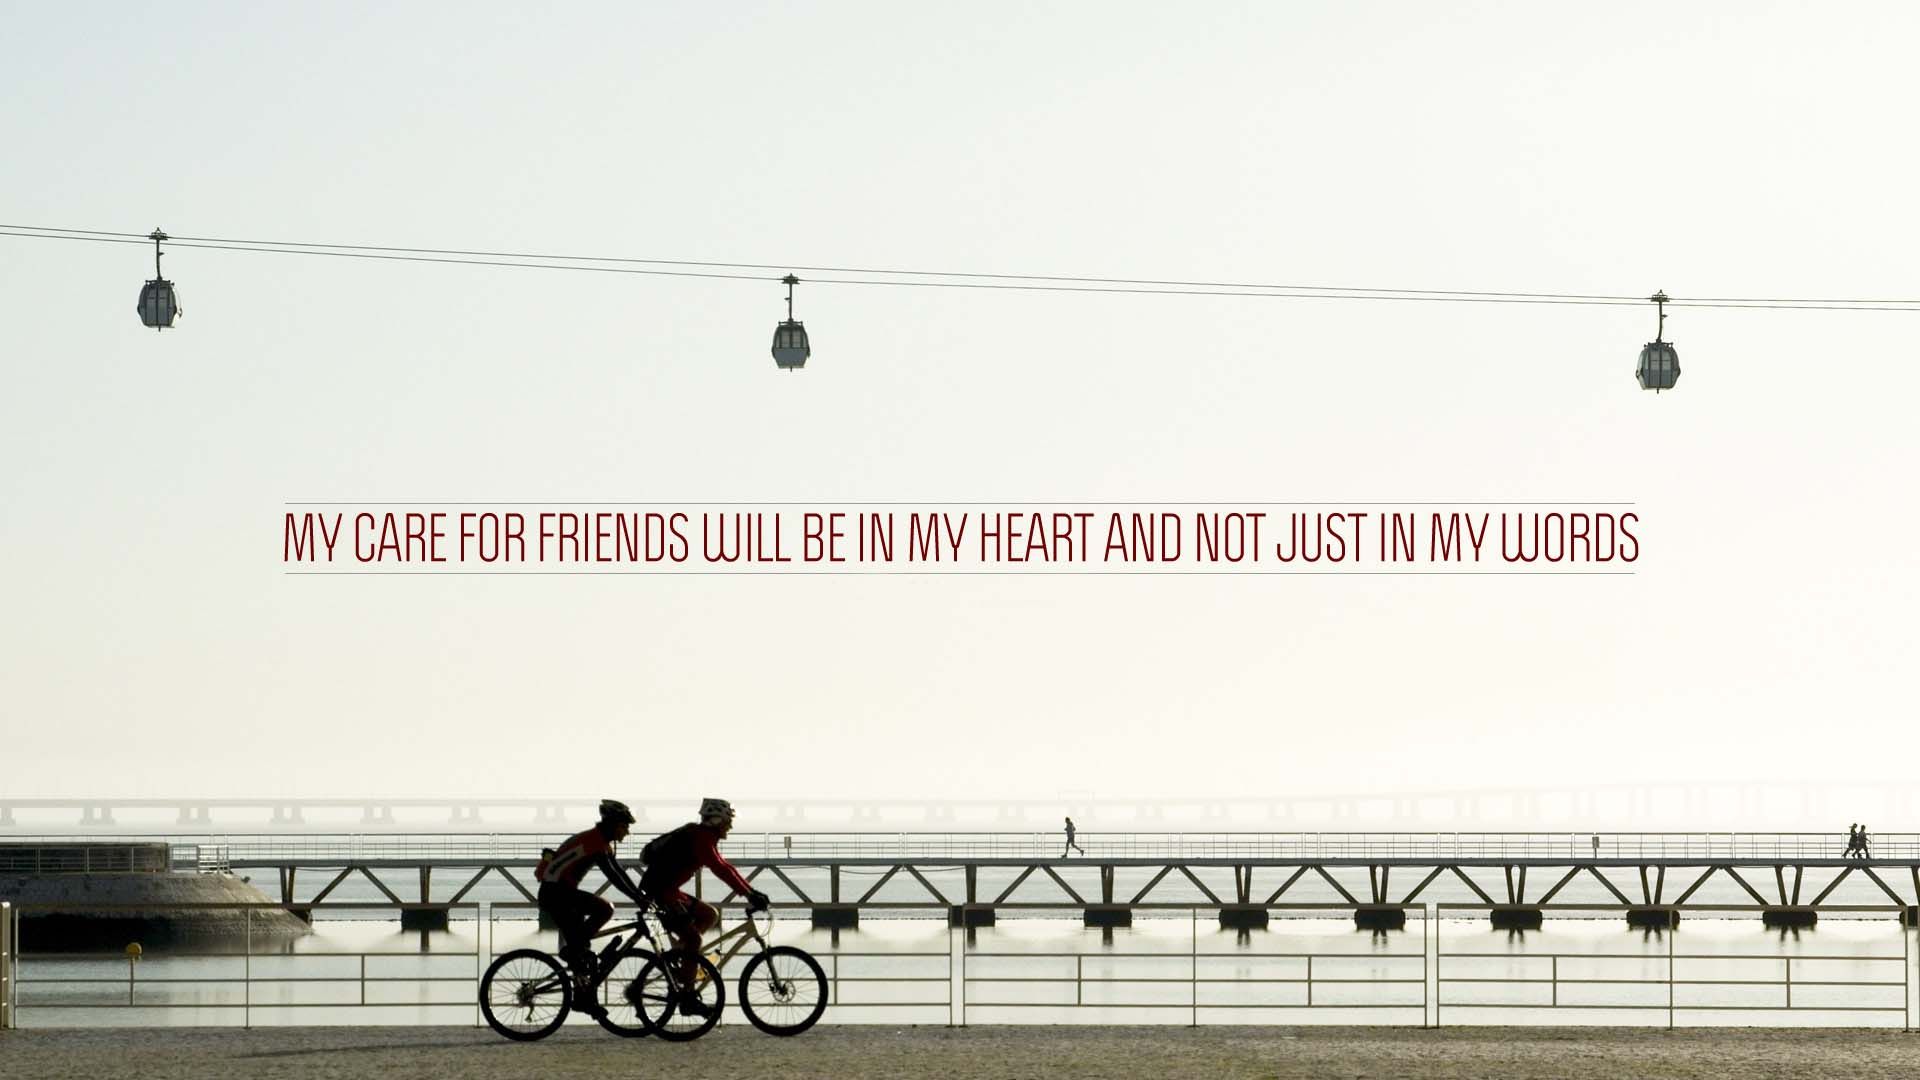 Friendship Quotes HD Image 2. Friendship quotes, HD quotes, I love my friends